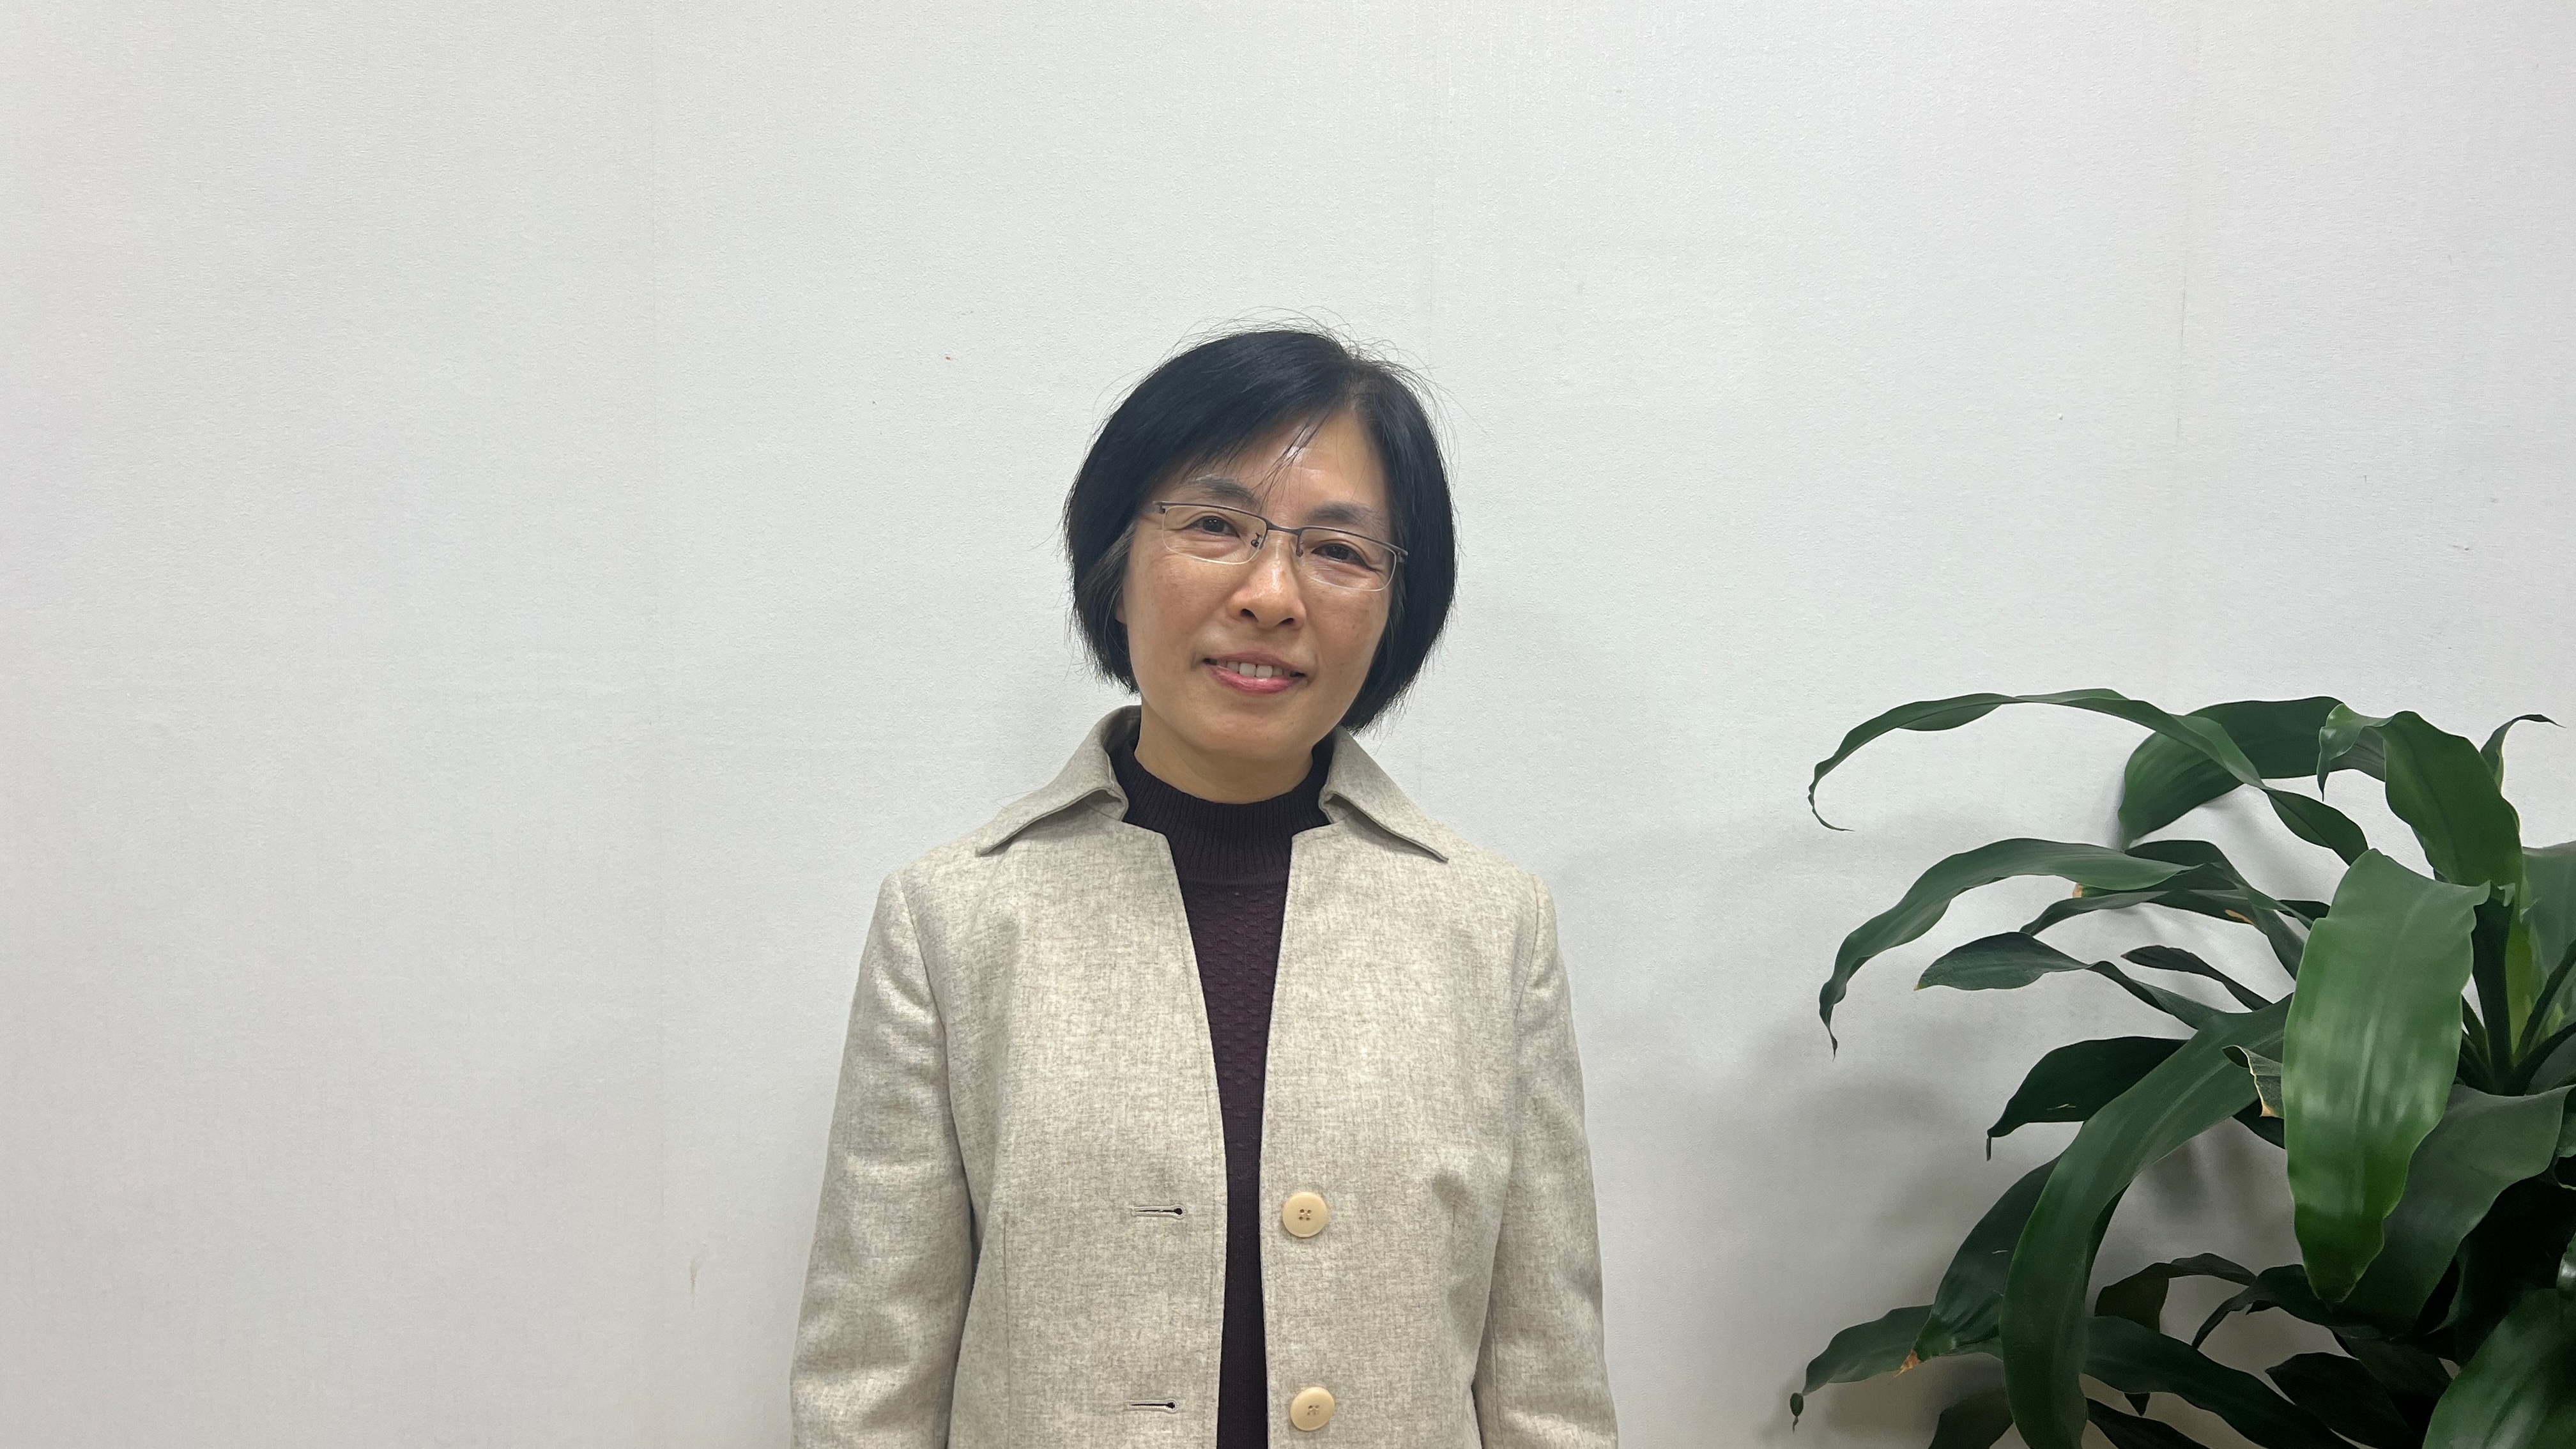 Chen Mei-Yen heads the department of the Taiwanese Financial Control Authority responsible for compliance with transparency laws in political financing.